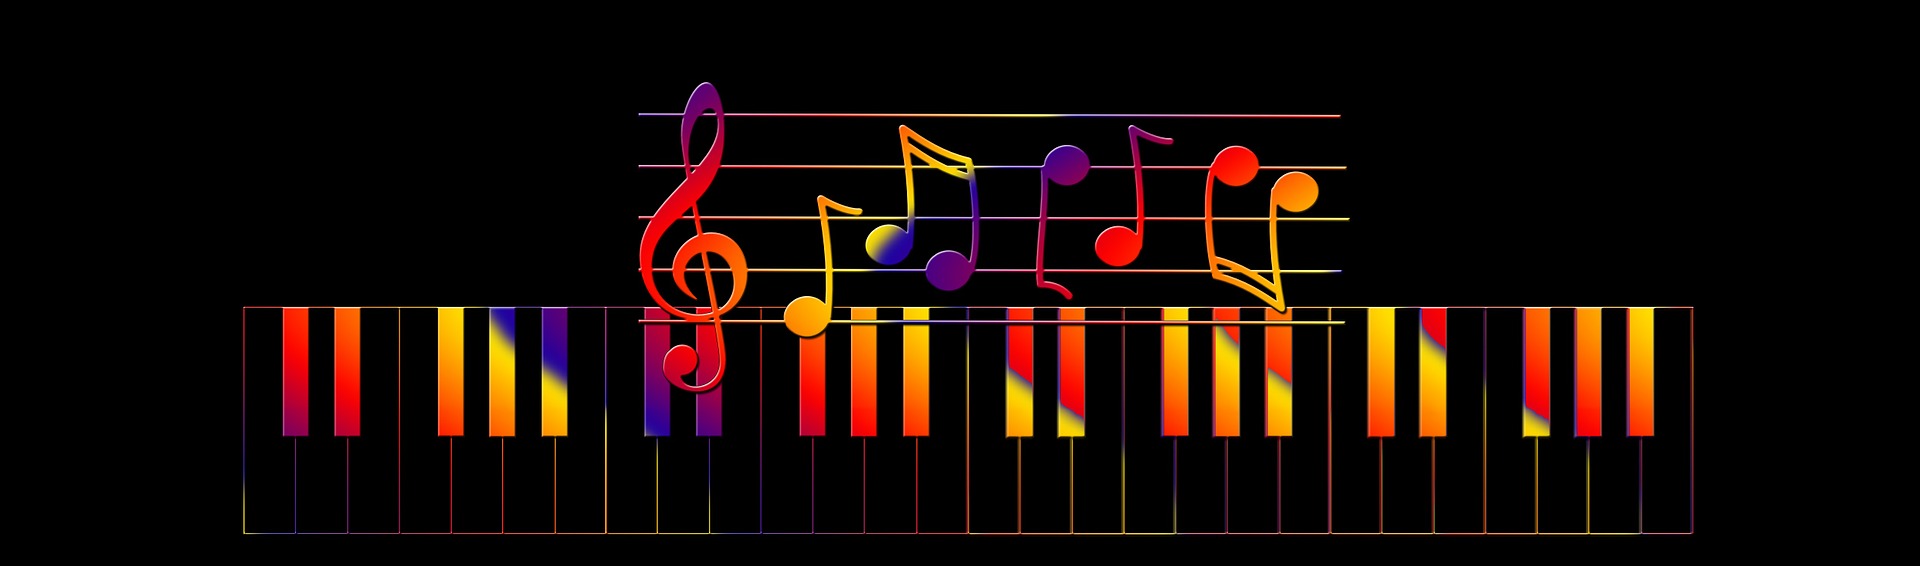 colorful-music